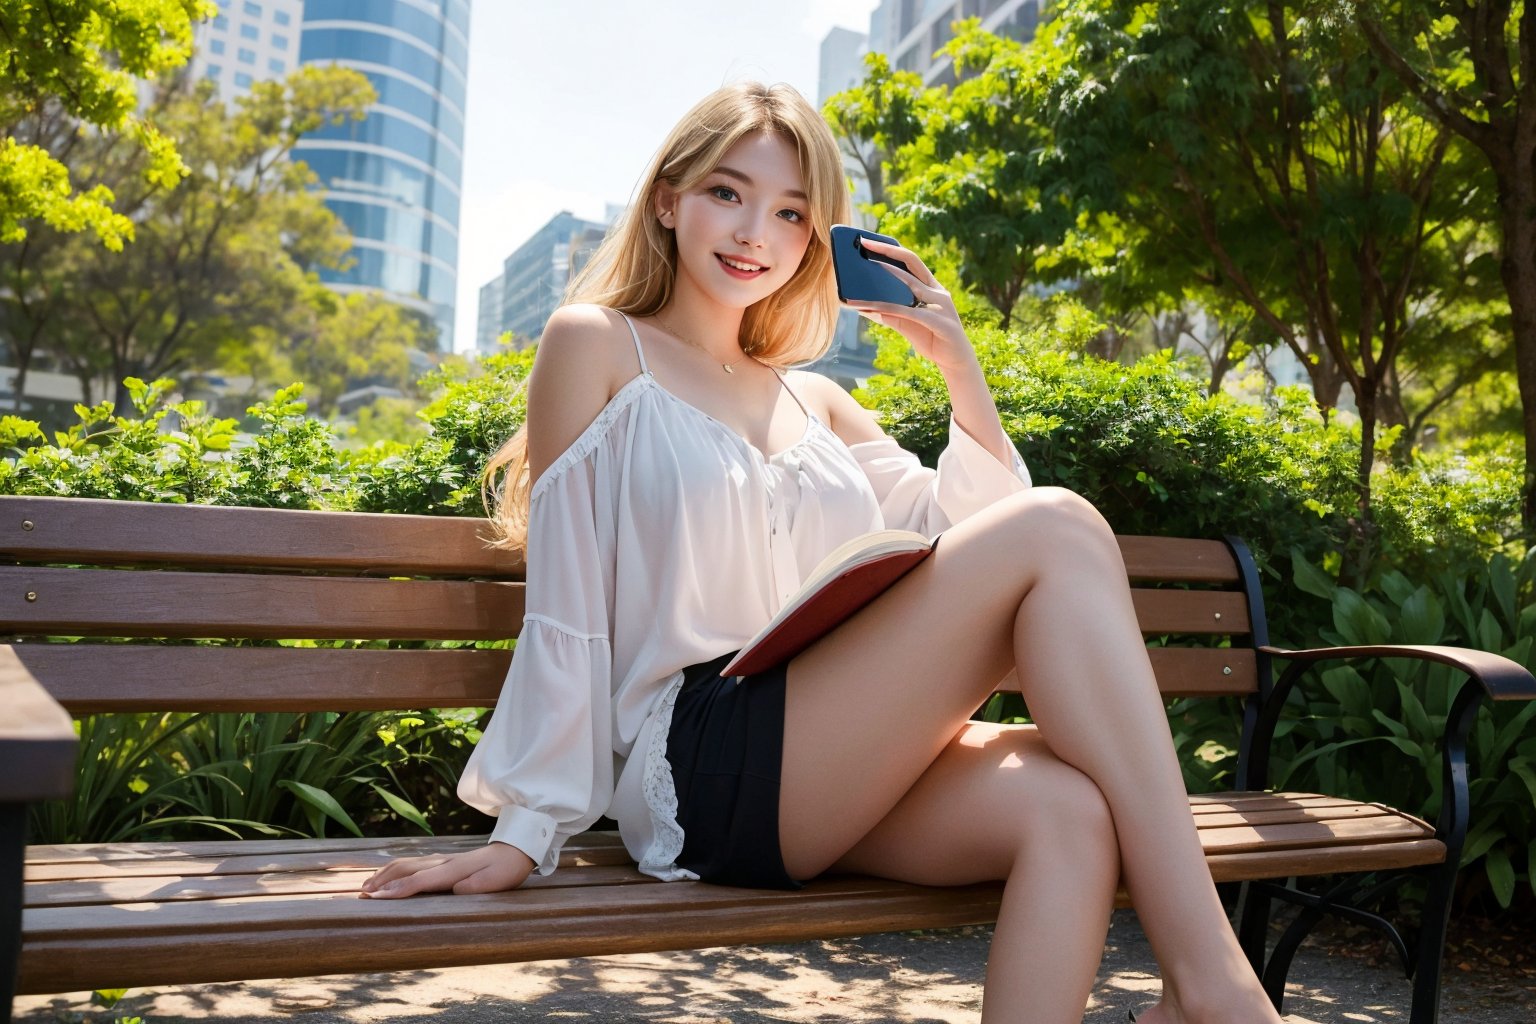 A stunning 23-year-old woman with piercing baby blue eyes and well-proportioned facial features poses against a cityscape backdrop, framed by sleek skyscrapers. Her consistent blonde long hair flows effortlessly, accentuating her flawless face under warm streetlights. In another scene, she walks barefoot on a sun-kissed beach at sunset, her flowing locks blowing gently in the ocean breeze. Next, she stands amidst lush forest foliage, her golden tresses entwining with branches as she gazes serenely into the distance. She lounges on a park bench, reads a book, and laughs with friends; confidently strides through a boardroom; playfully dances on a city street; leans in for a romantic kiss; takes a selfie with her phone; gets married; enjoys a night out at a bar; and reminisces about her childhood, all while maintaining her iconic blonde hair and adapting facial expressions to each setting.